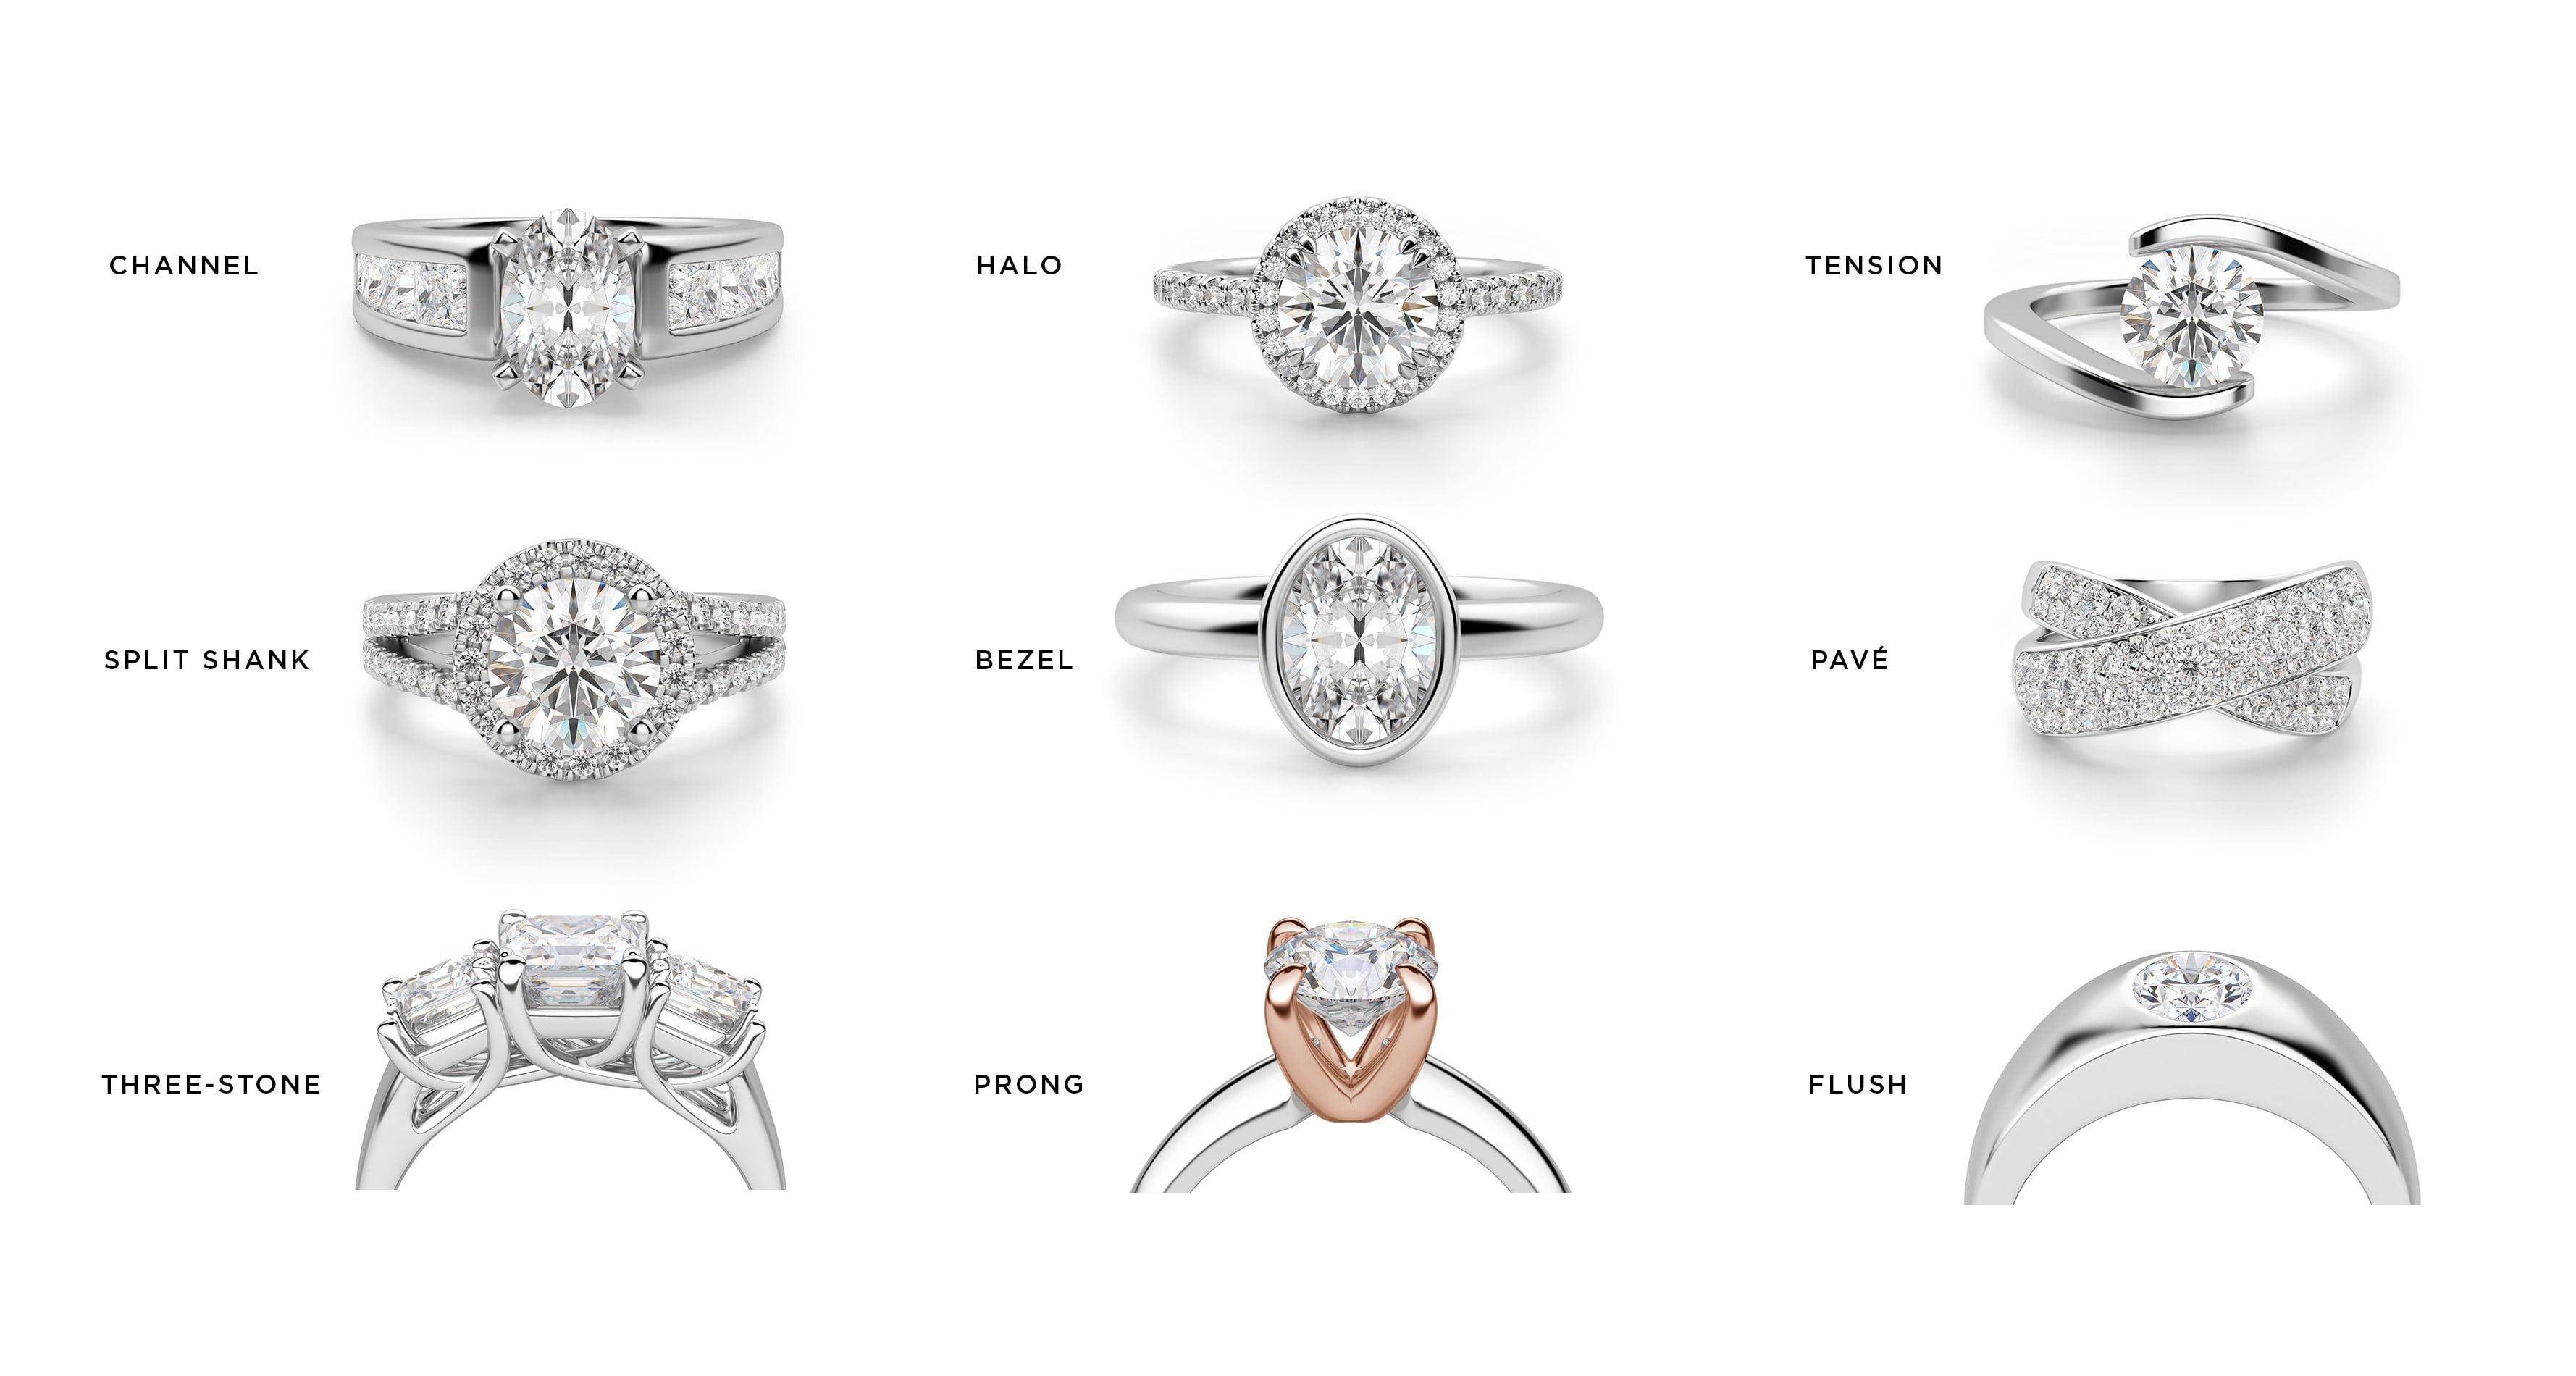 Examples of different engagement ring setting options.